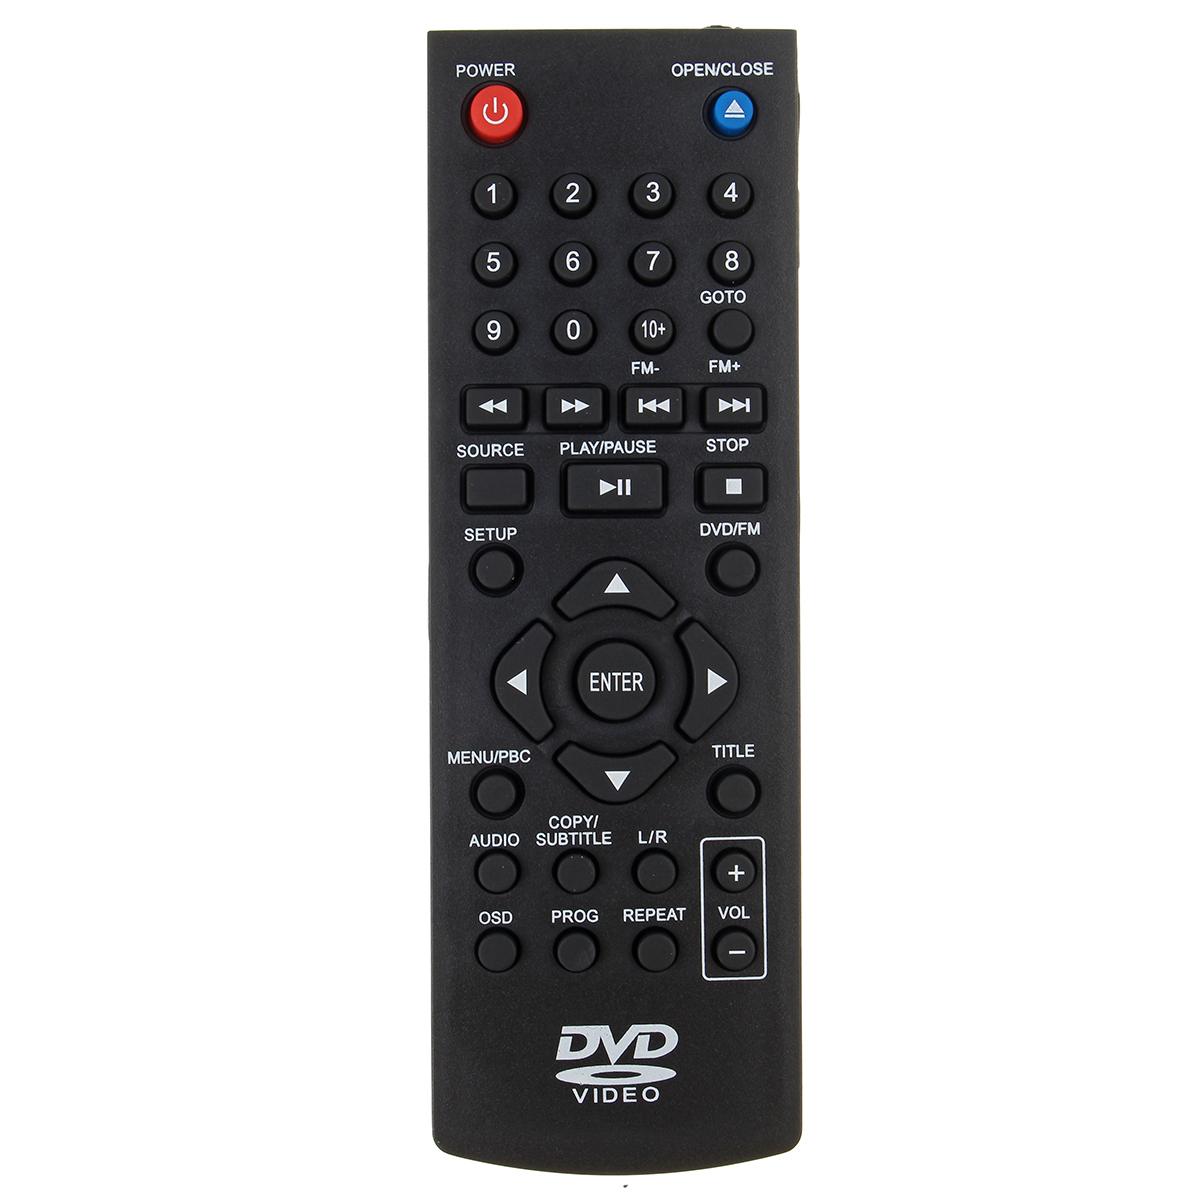 Home 1080P HD DVD Player HDMI-compatible USB Multimedia Digital DVD TV Support HDMI-compatible CD SVCD VCD MP3 MP4 Video